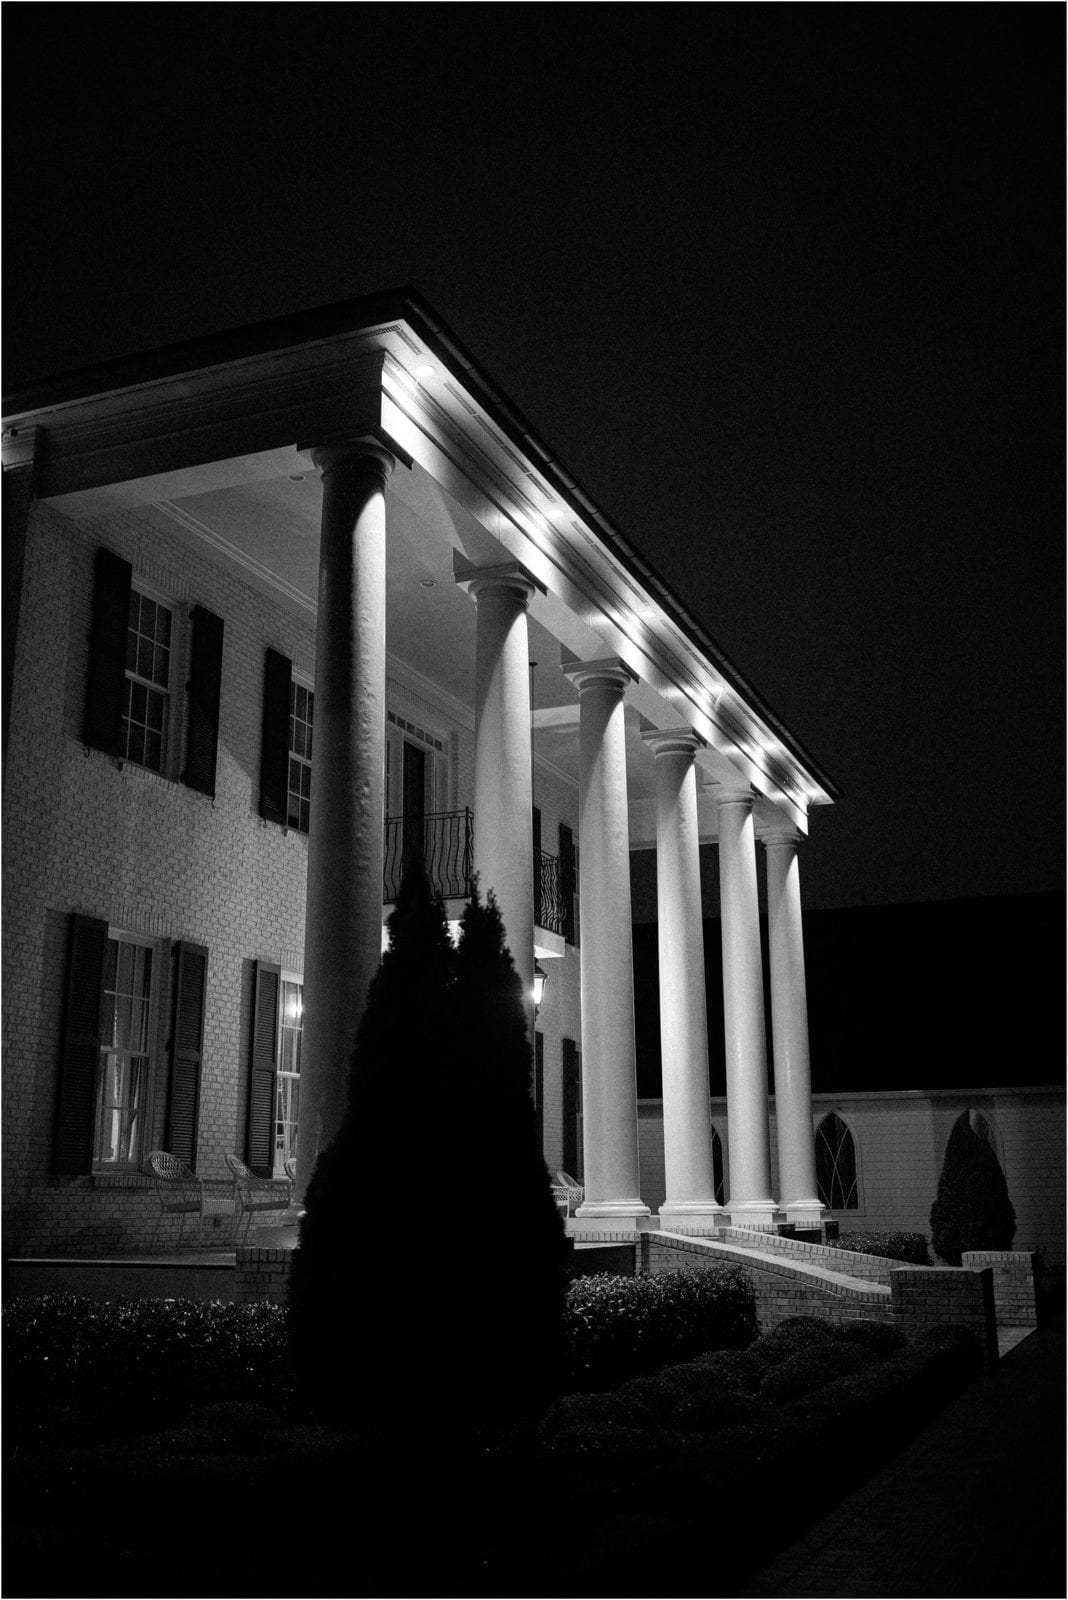 black and white image of the venue at night